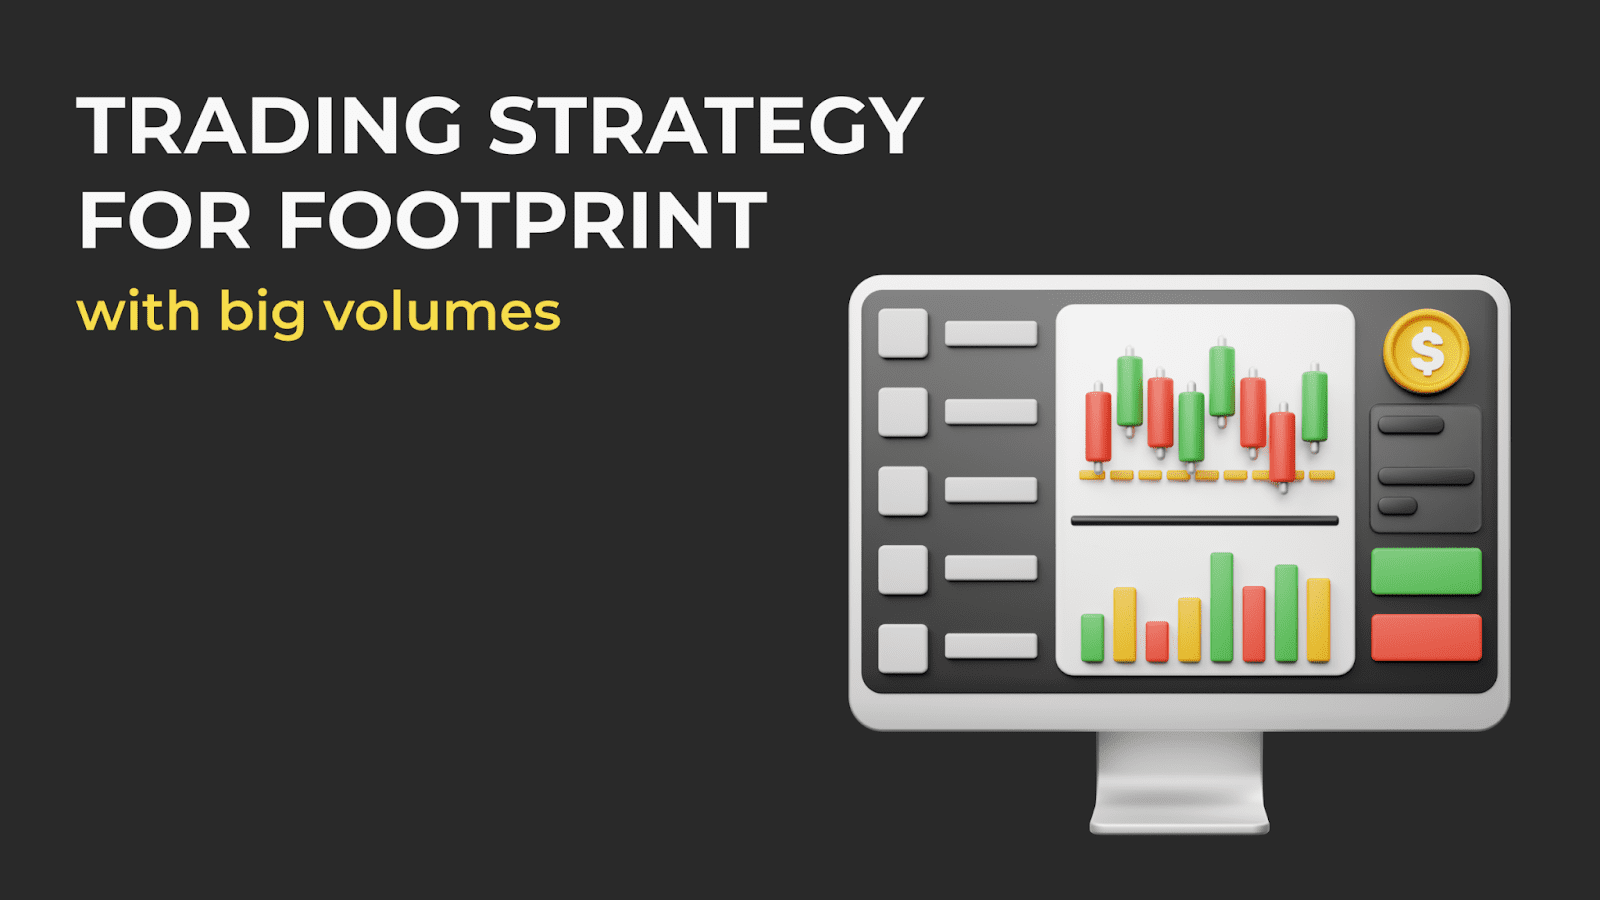 Trading strategy for Footprint with big volumes